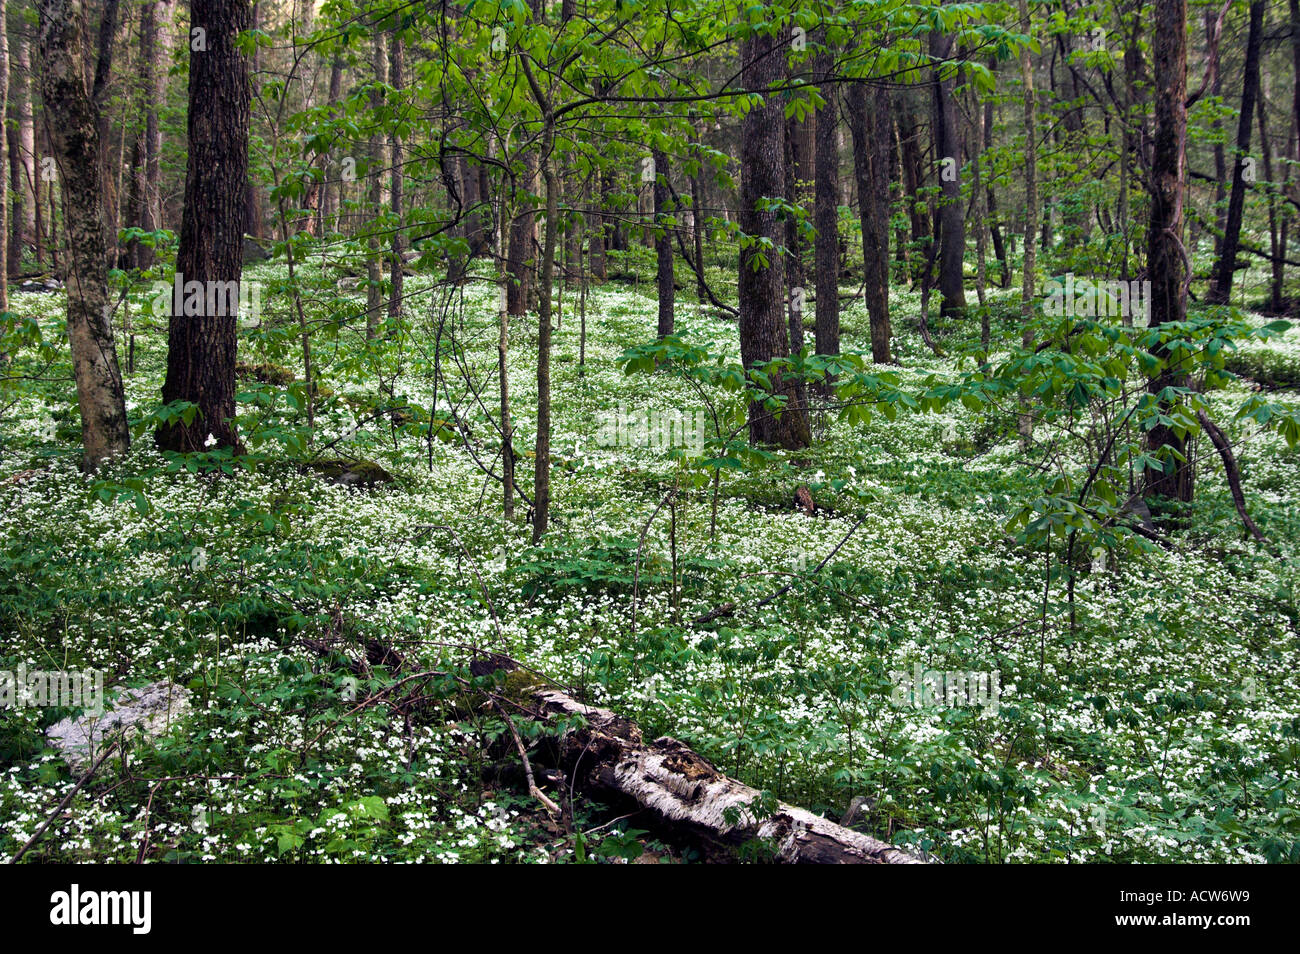 Large White Trillium wildflowers on the forest floor in The Great Smoky Mountain National Park, North Carolina, USA Stock Photo